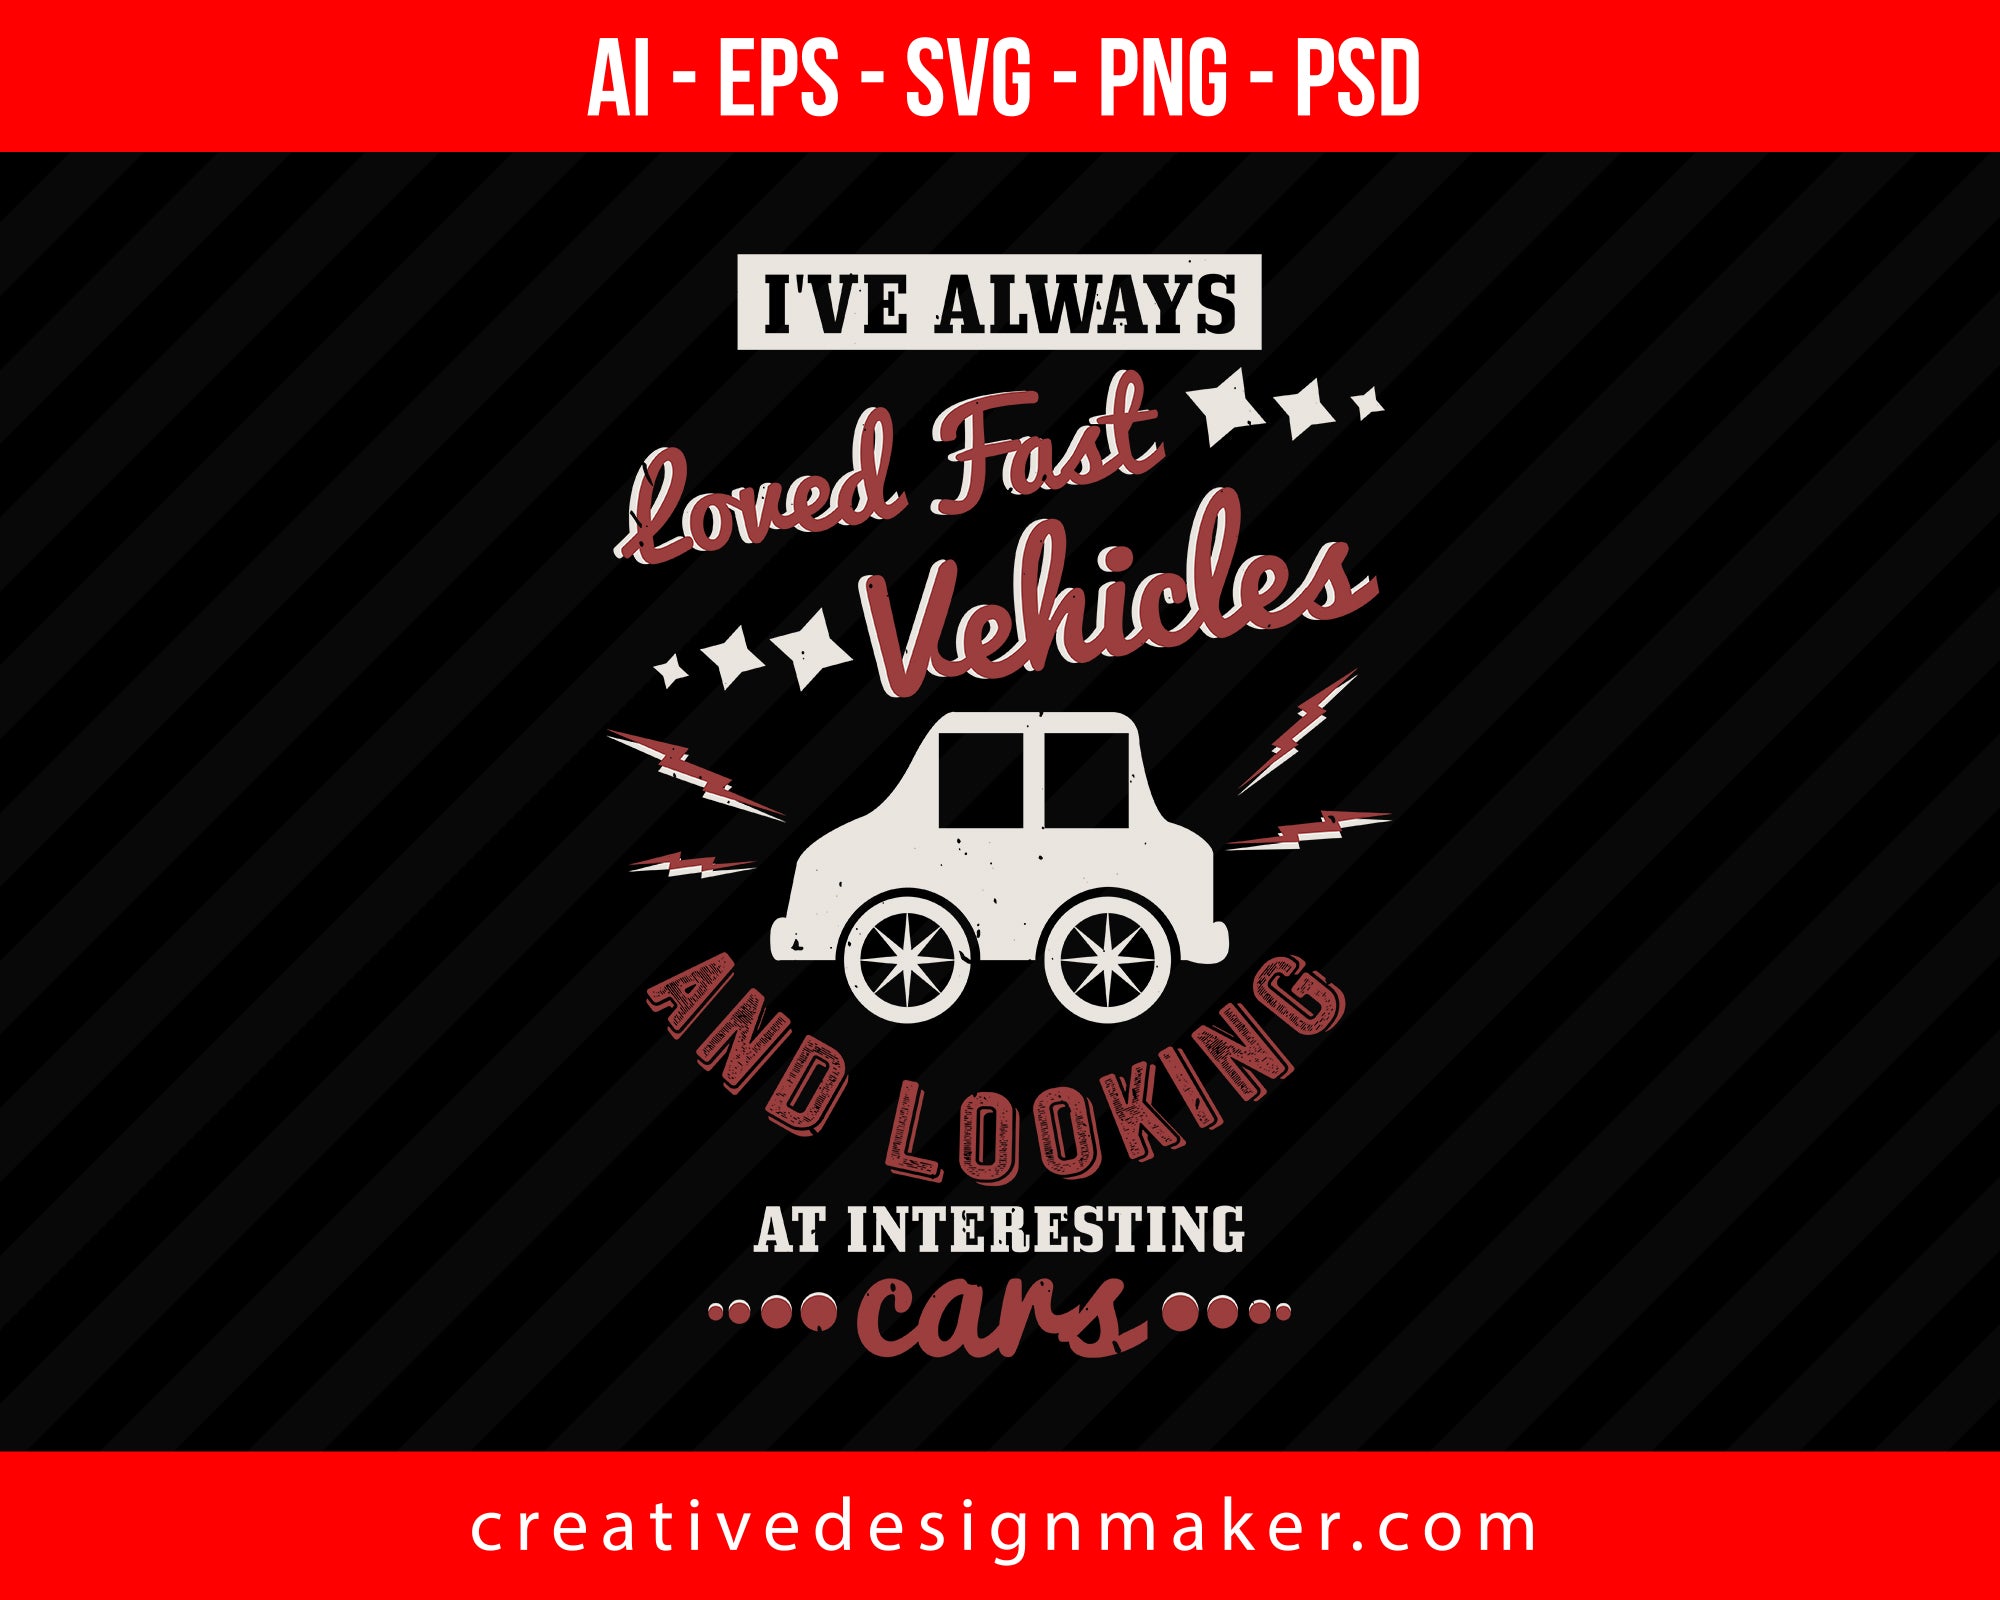 I've always loved fast vehicles and looking at interesting cars Print Ready Editable T-Shirt SVG Design!